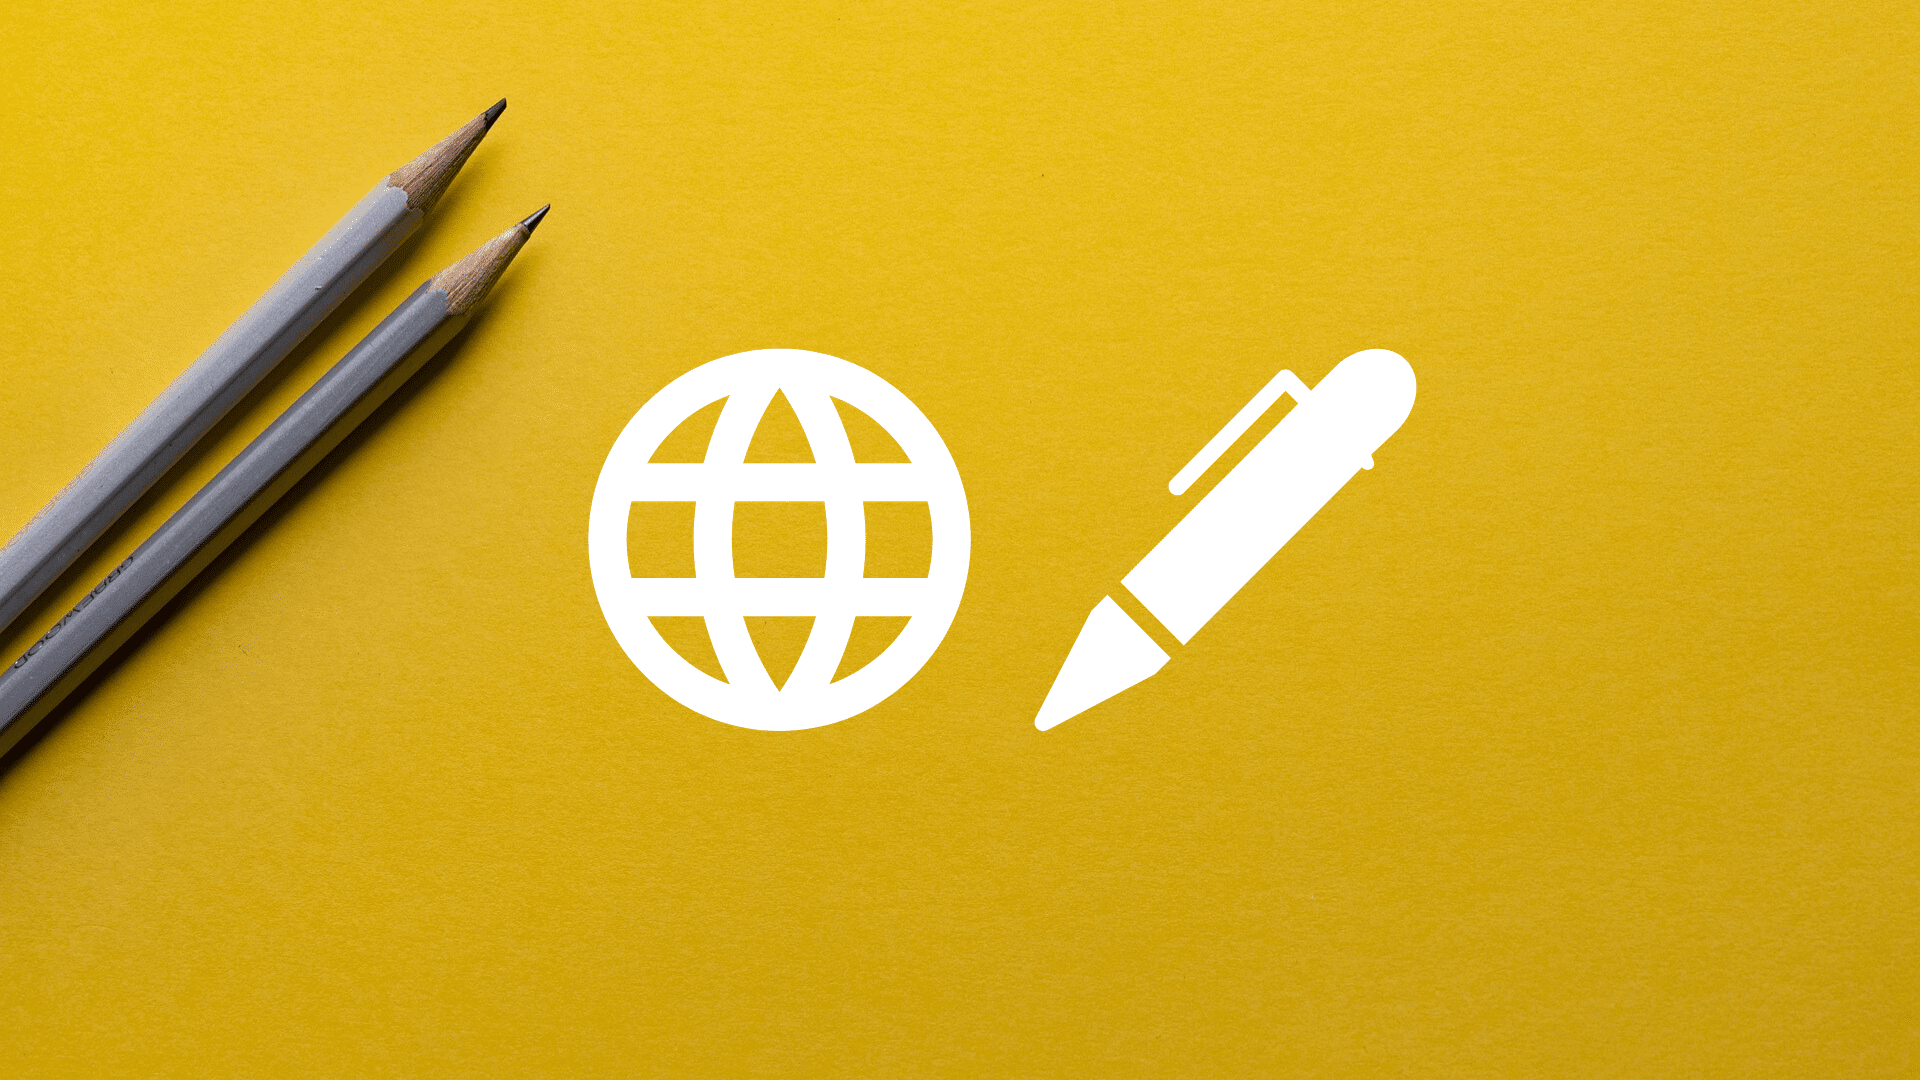 Content Localization: Writing Content That’s Easy to Localize